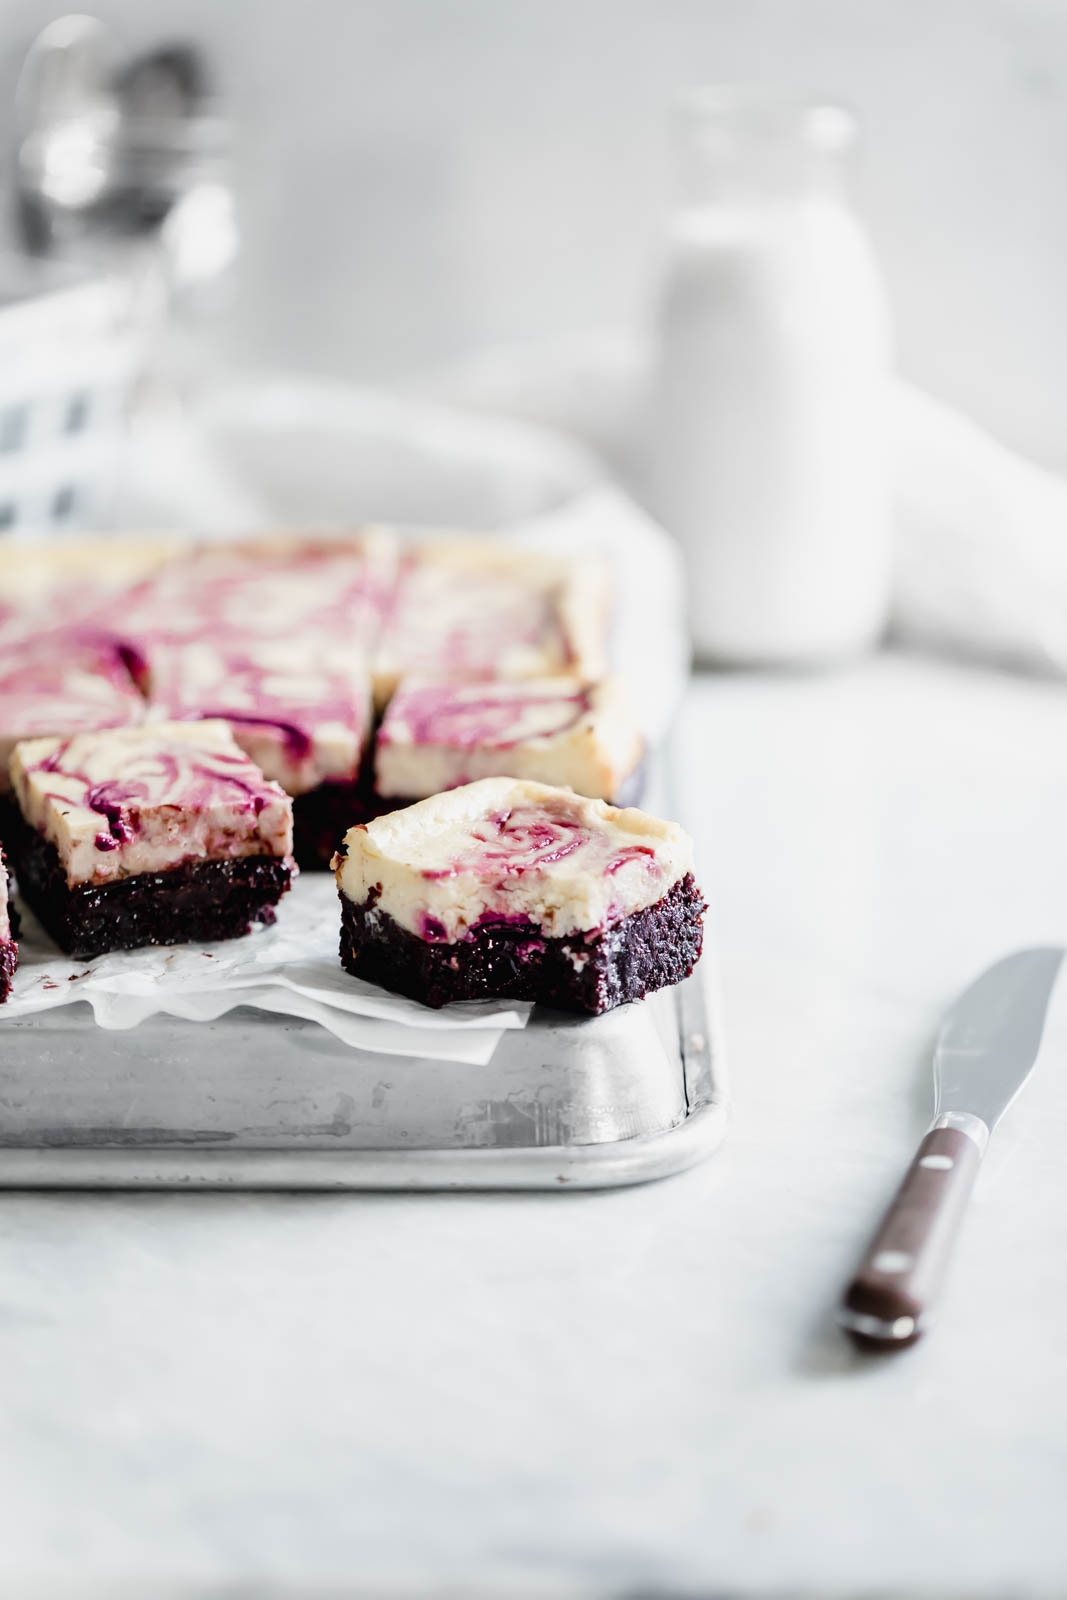 Rich fudge brownies topped with creamy cheesecake and a sinful black cherry swirl. Easy to make and even easier to devour.